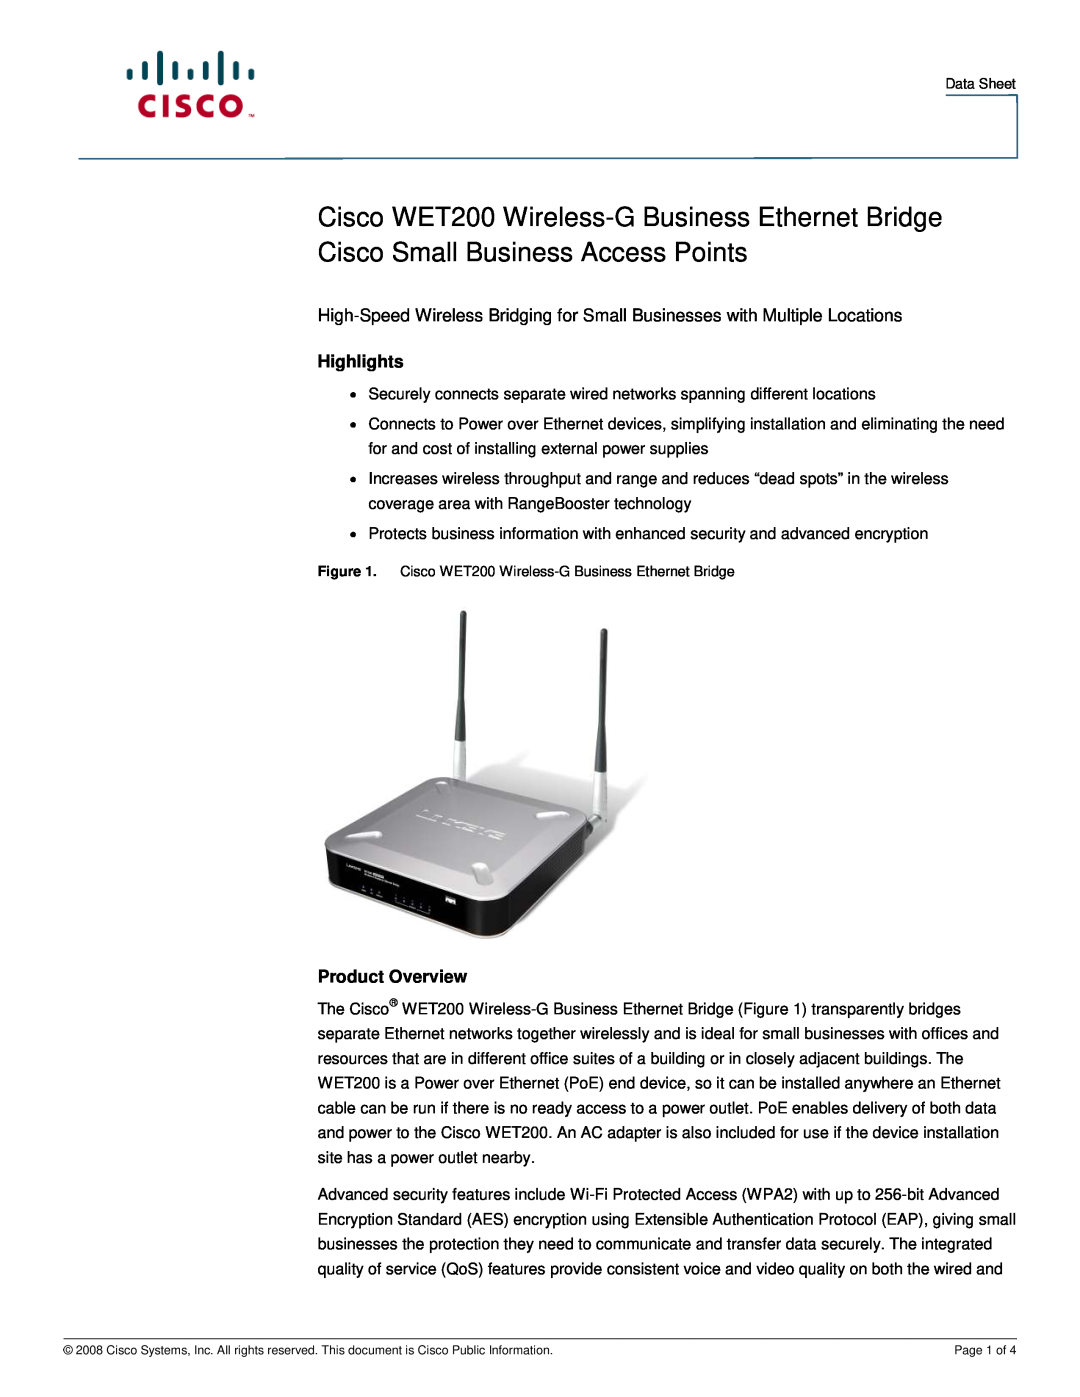 Cisco Systems WET200 manual Wireless-G Business Ethernet Bridge, Business Series, Quick Installation, Package Contents 